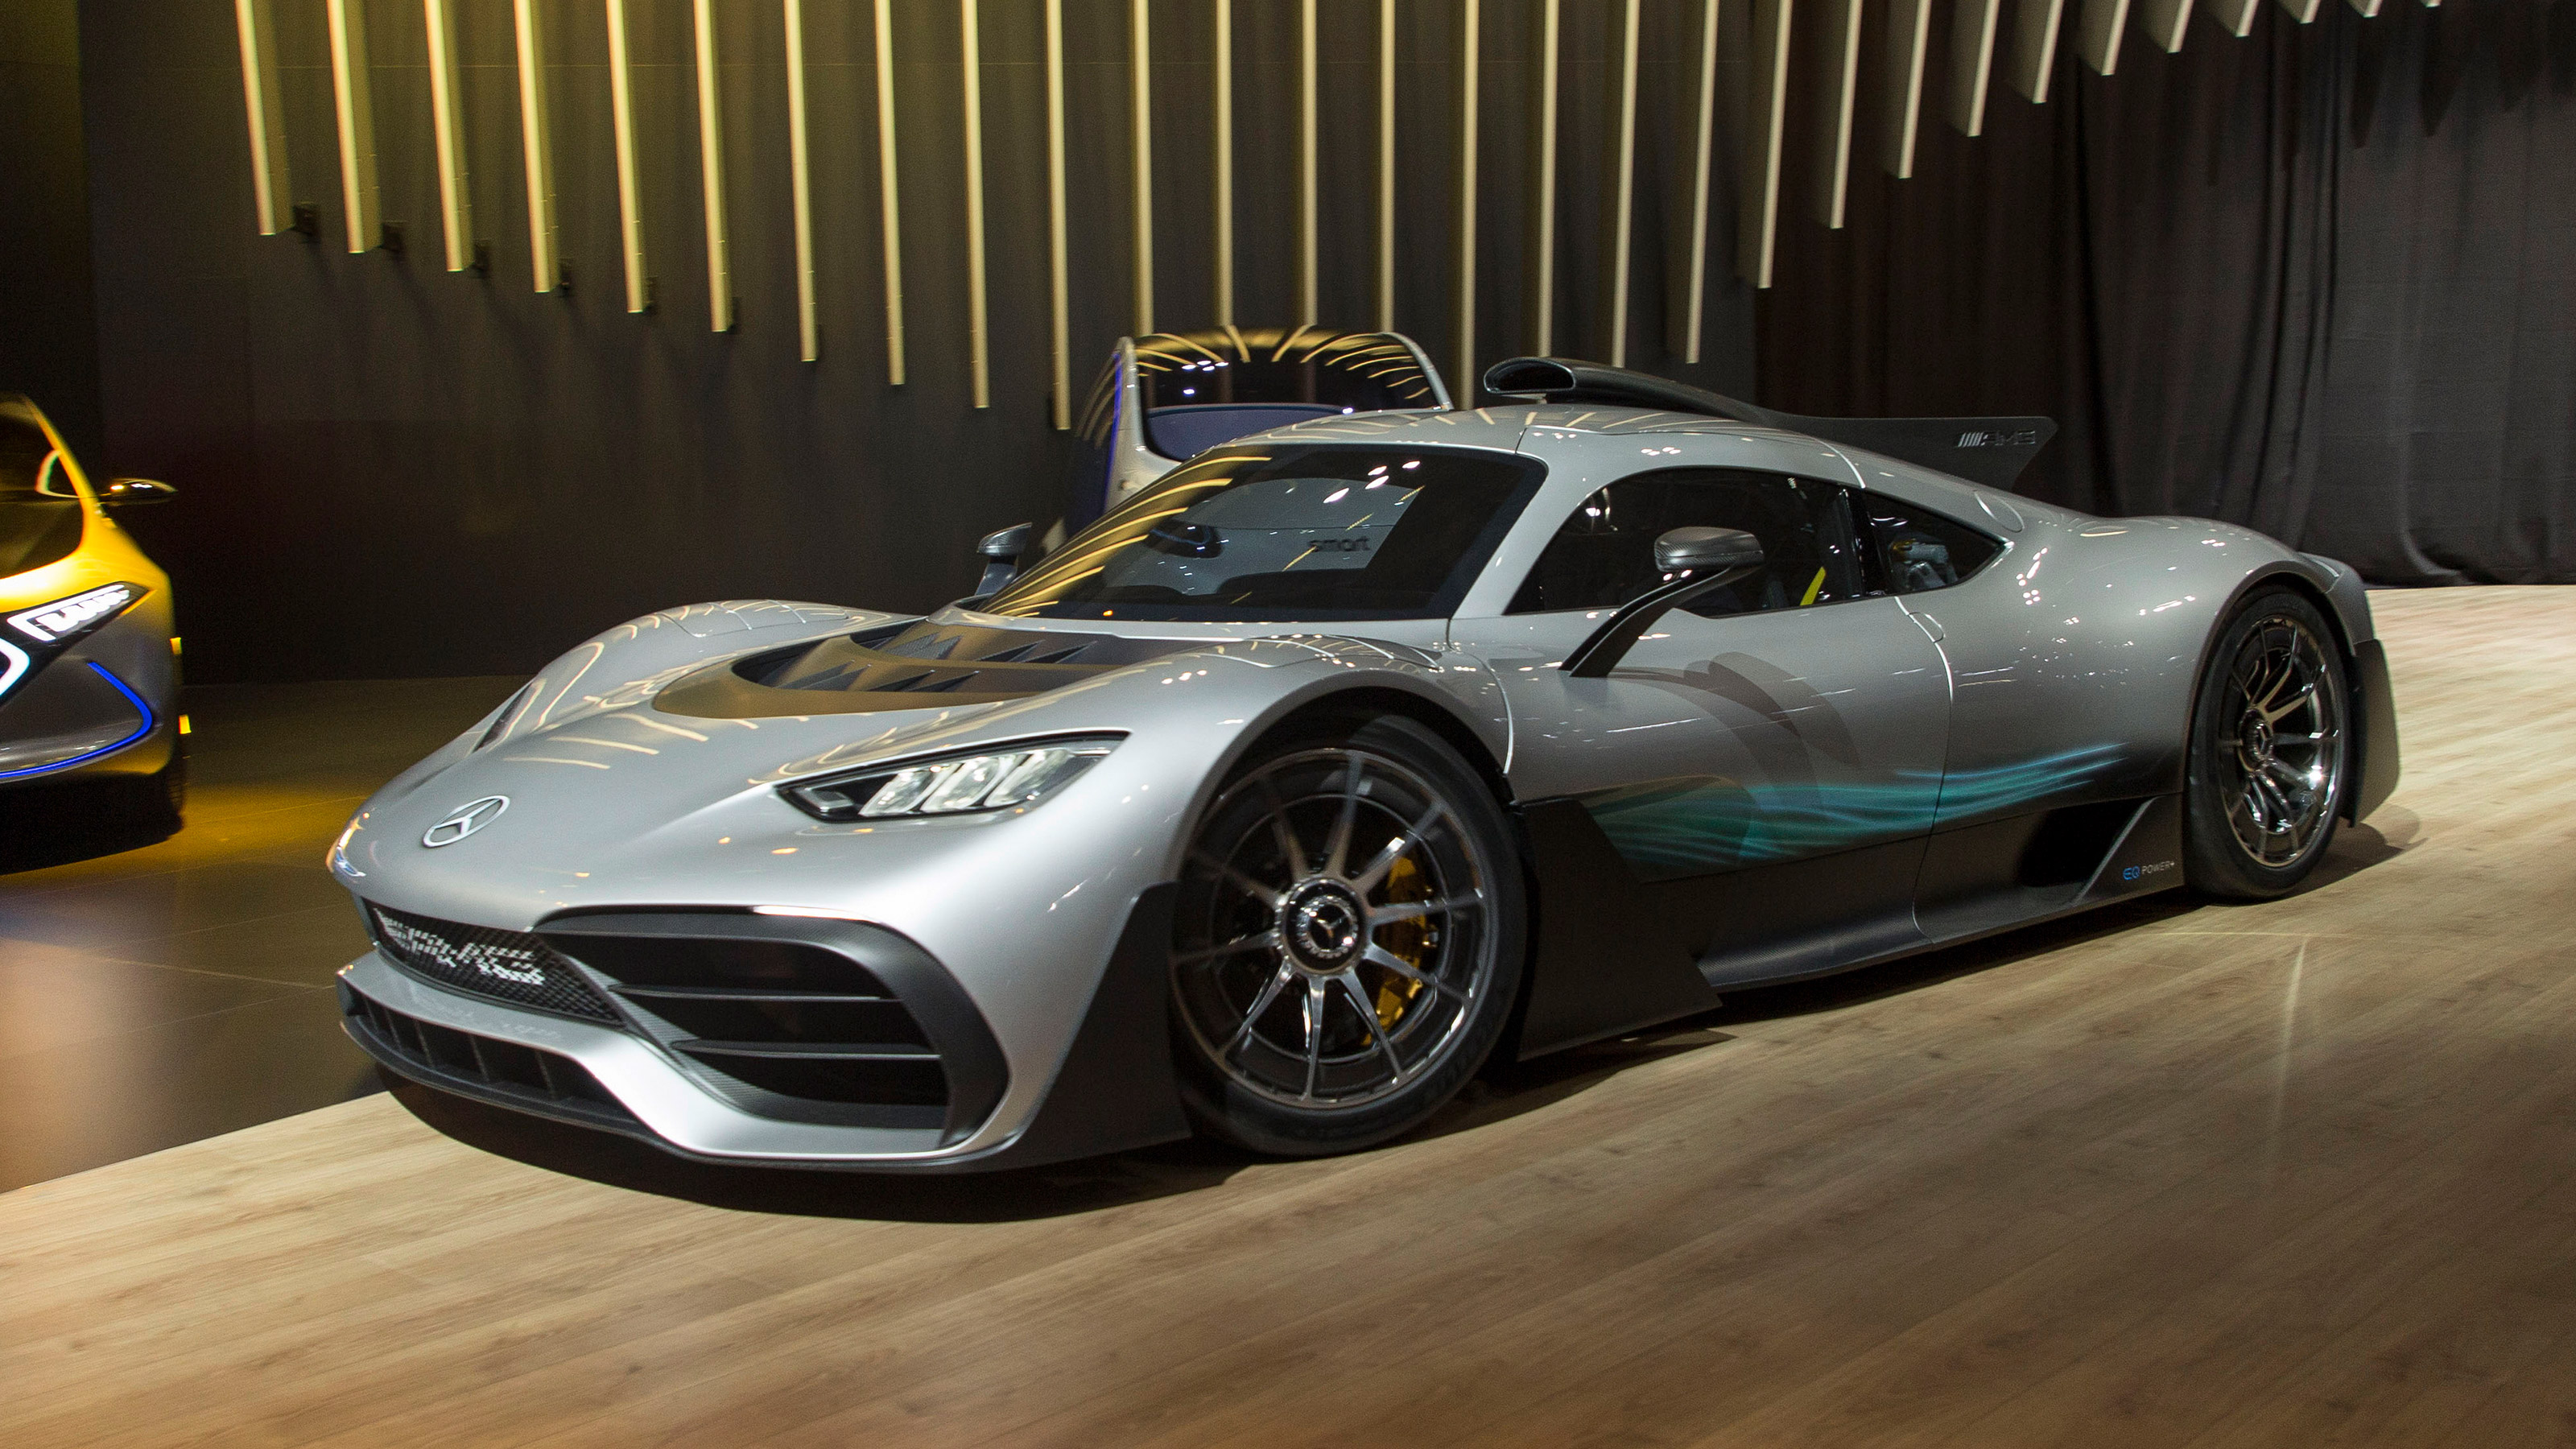 bao kanye west astonished the entire world by gifting justin bieber a mercedes amg project one supercar to celebrate the birth of his first son and express gratitude for their collaboration on the upcoming music video 65415c05964d8 Kanye West Astonished The Entire World By Gifting Justin Bieber A Mercedes-amg Project One Supercar To Celebrate The Birth Of His First Son And Express Gratitude For Their Collaboration On The Upcoming Music Video.